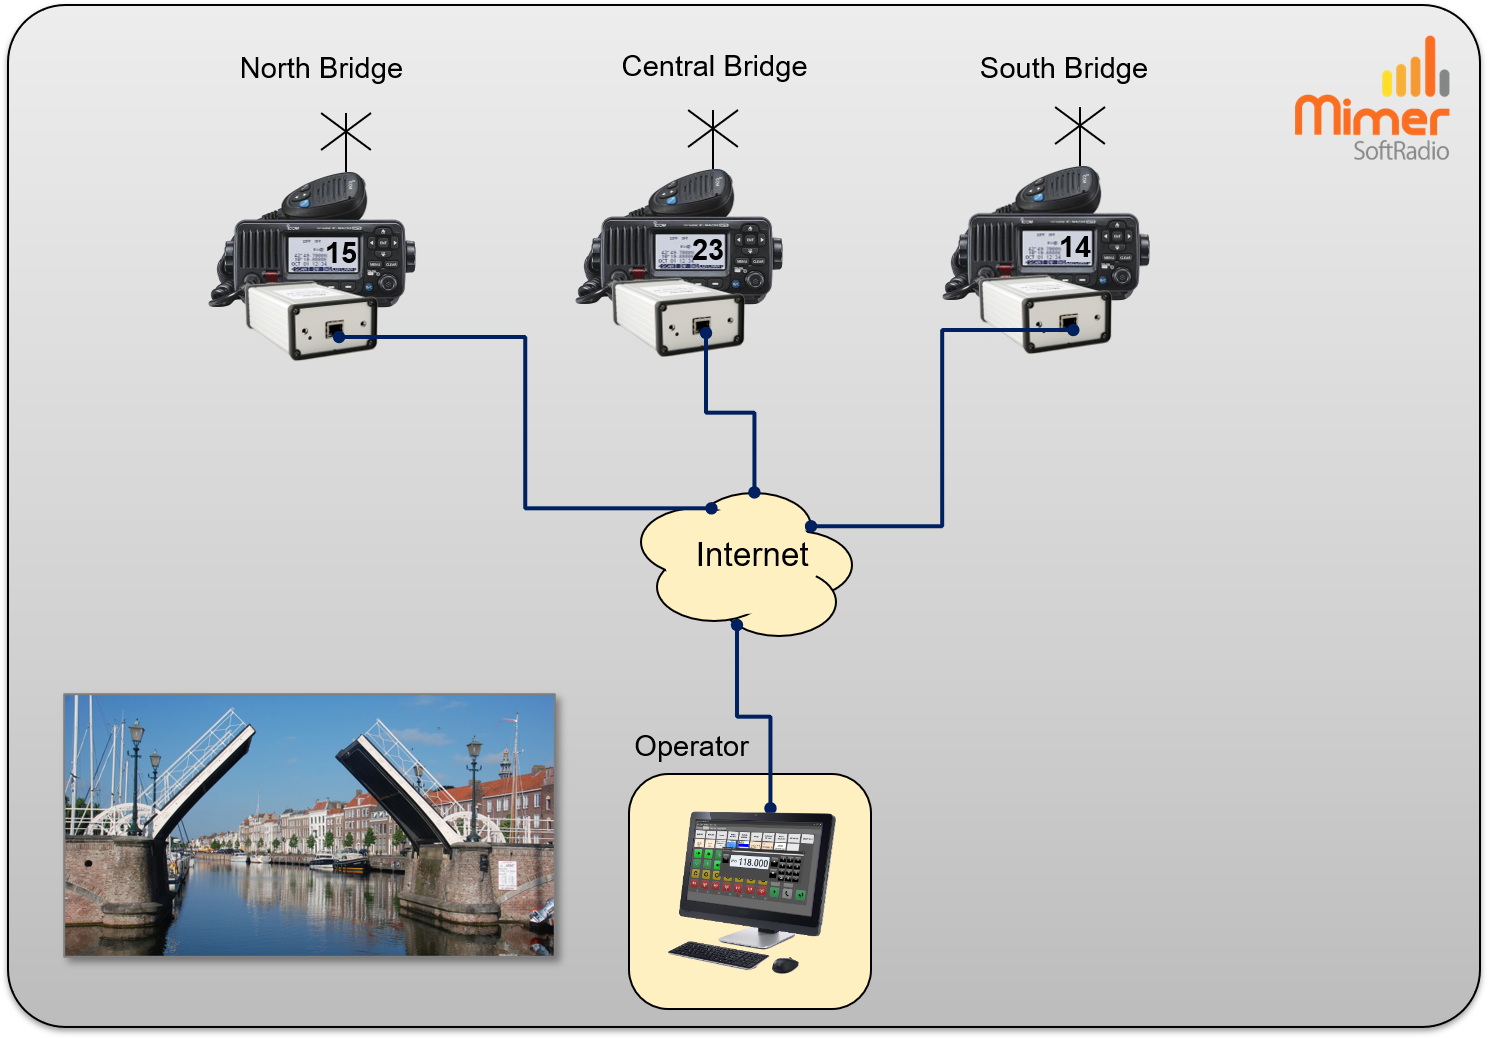 Example with three radios at different bridges, along a water way, controlled from one operator position